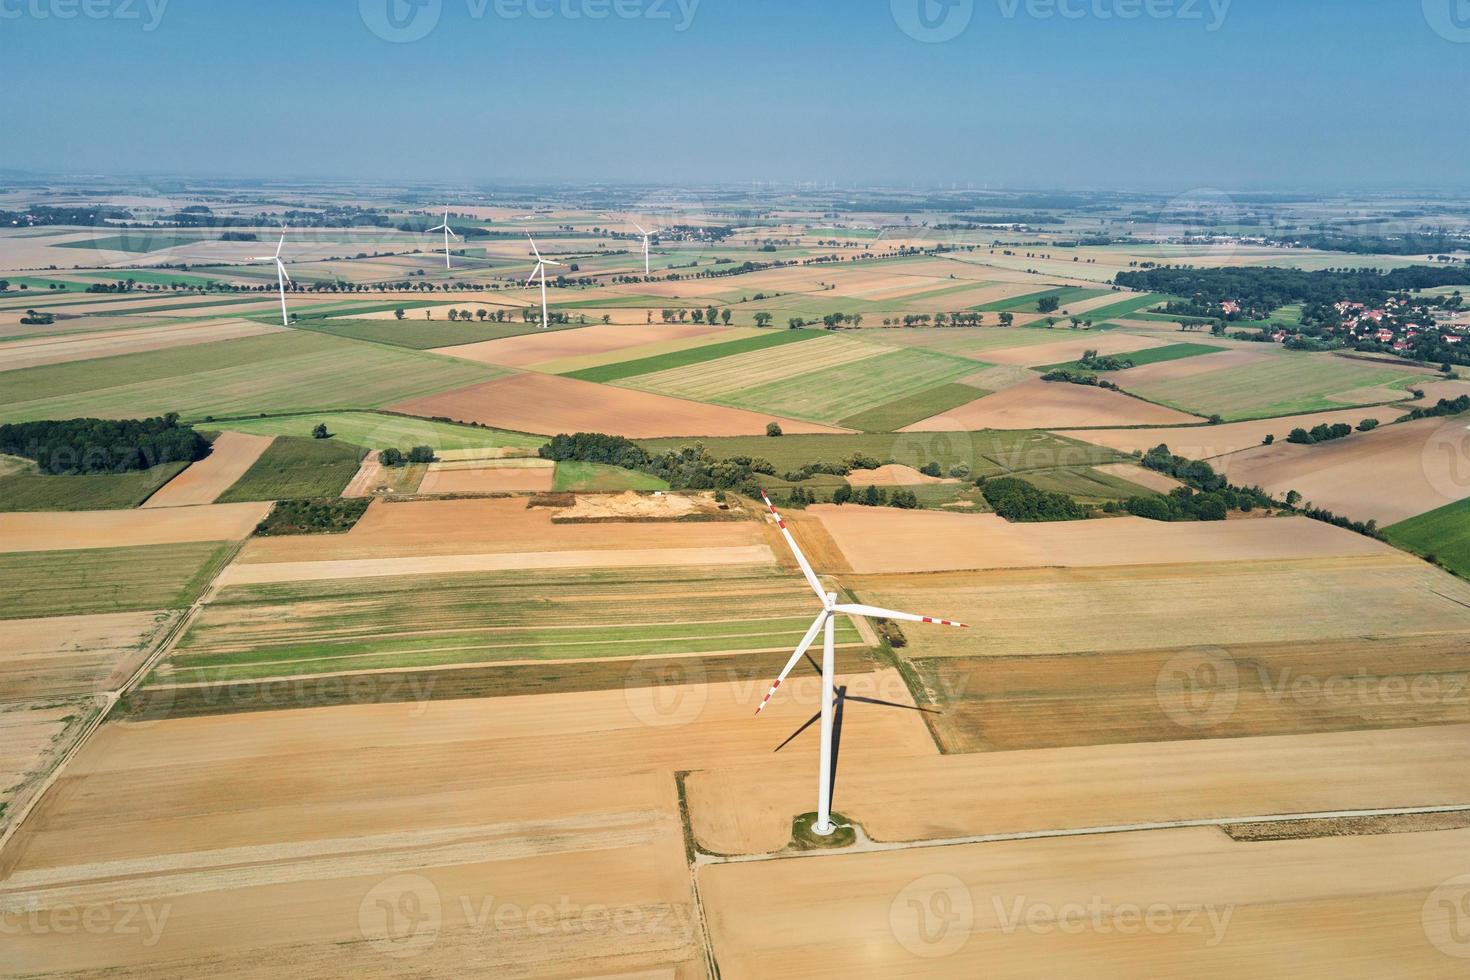 Windmill turbine in the field at summer day. Rotating wind generator photo